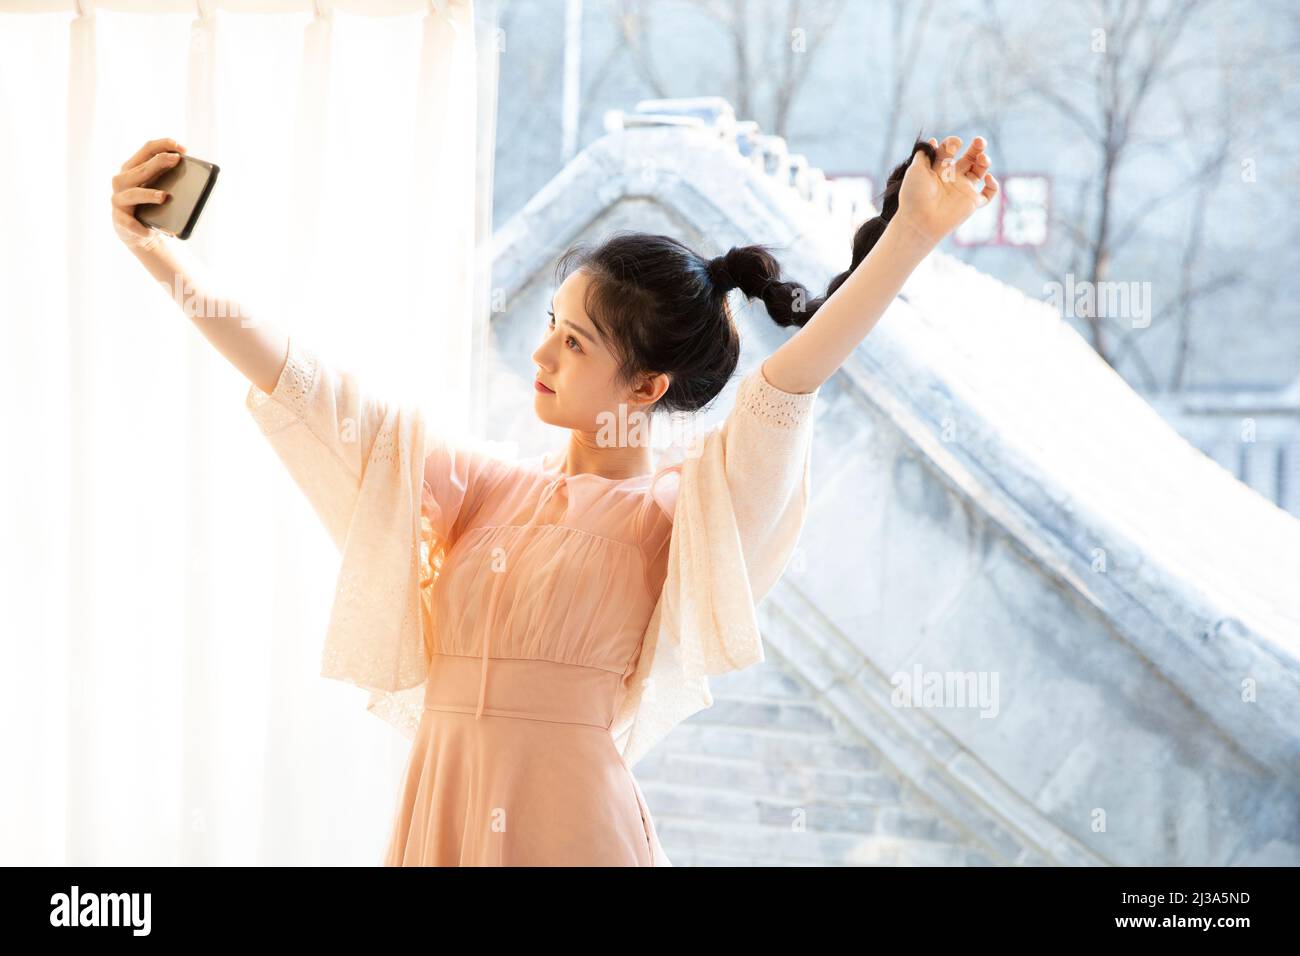 A young fashionable woman spends her leisure time looking at herself in the mirror using her mobile phone selfie function - stock photo Stock Photo